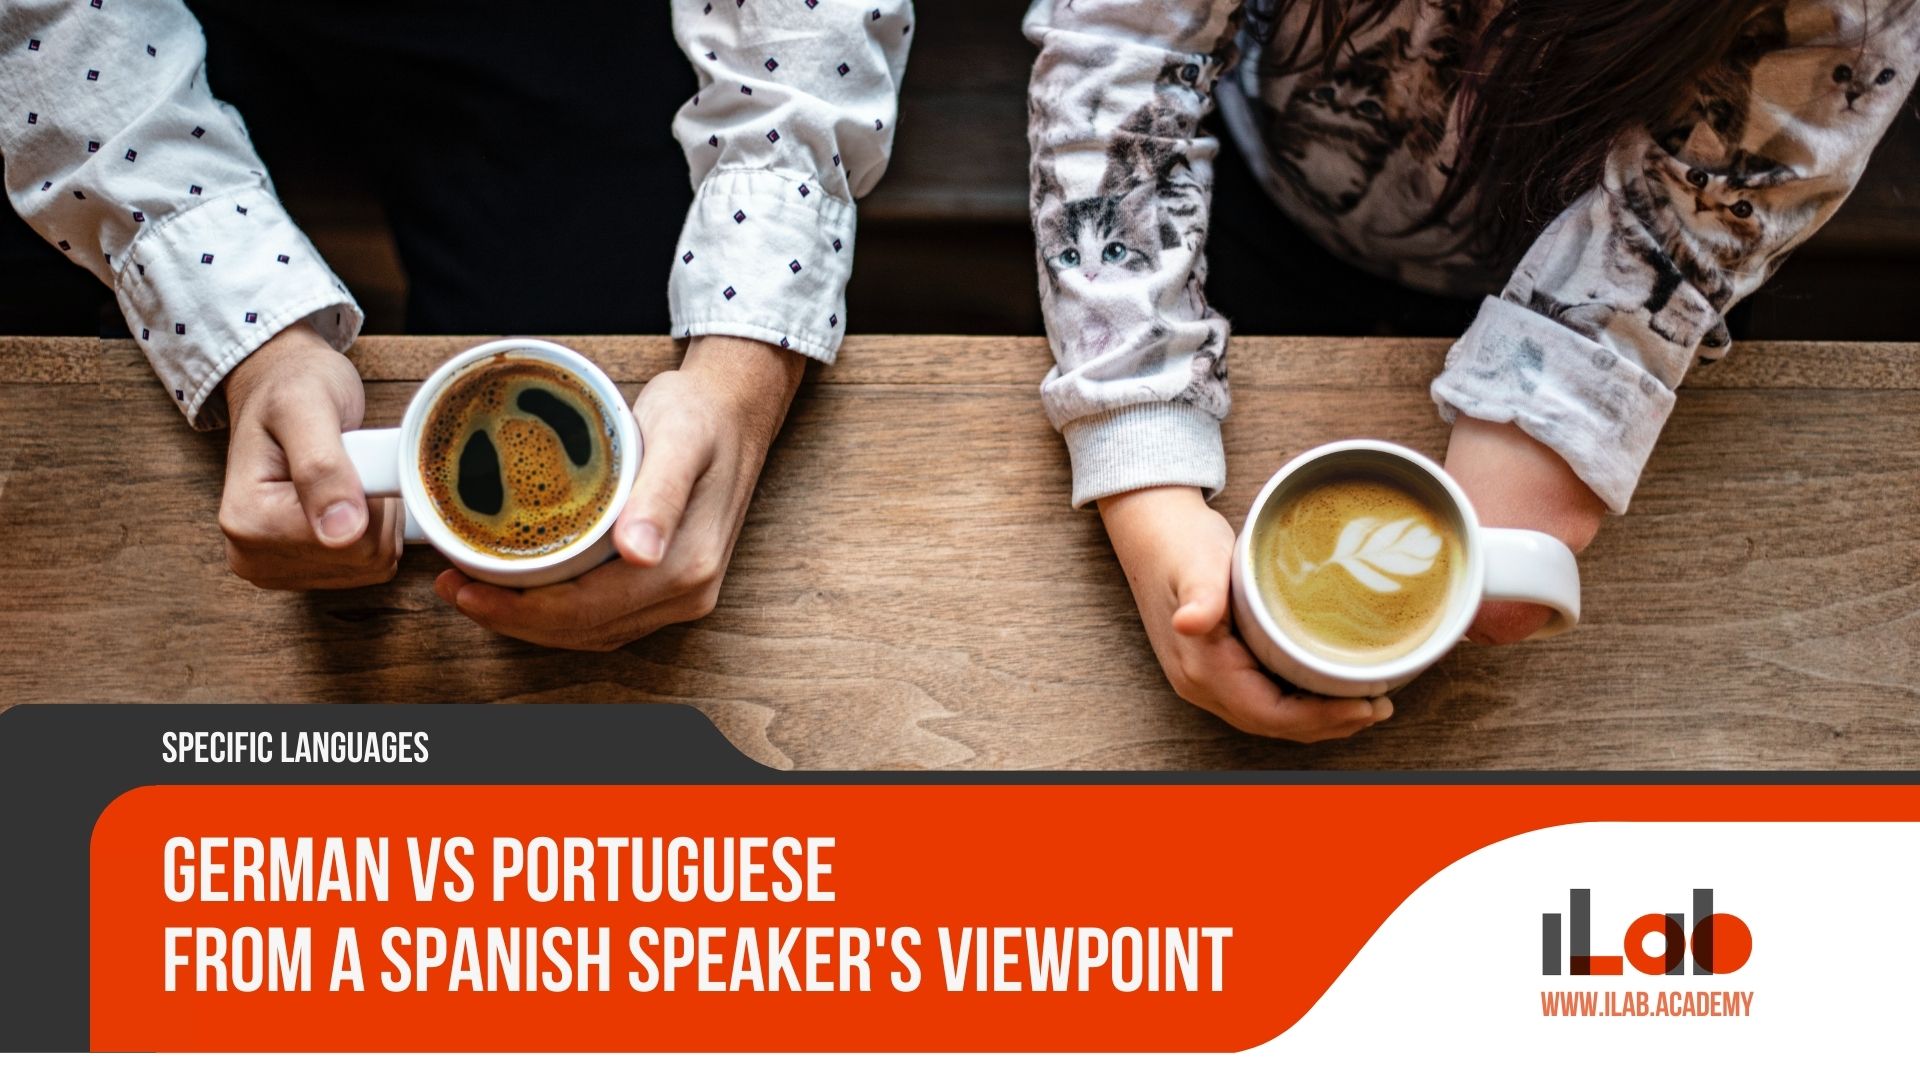 German Vs Portuguese From a Spanish Speaker's Viewpoint